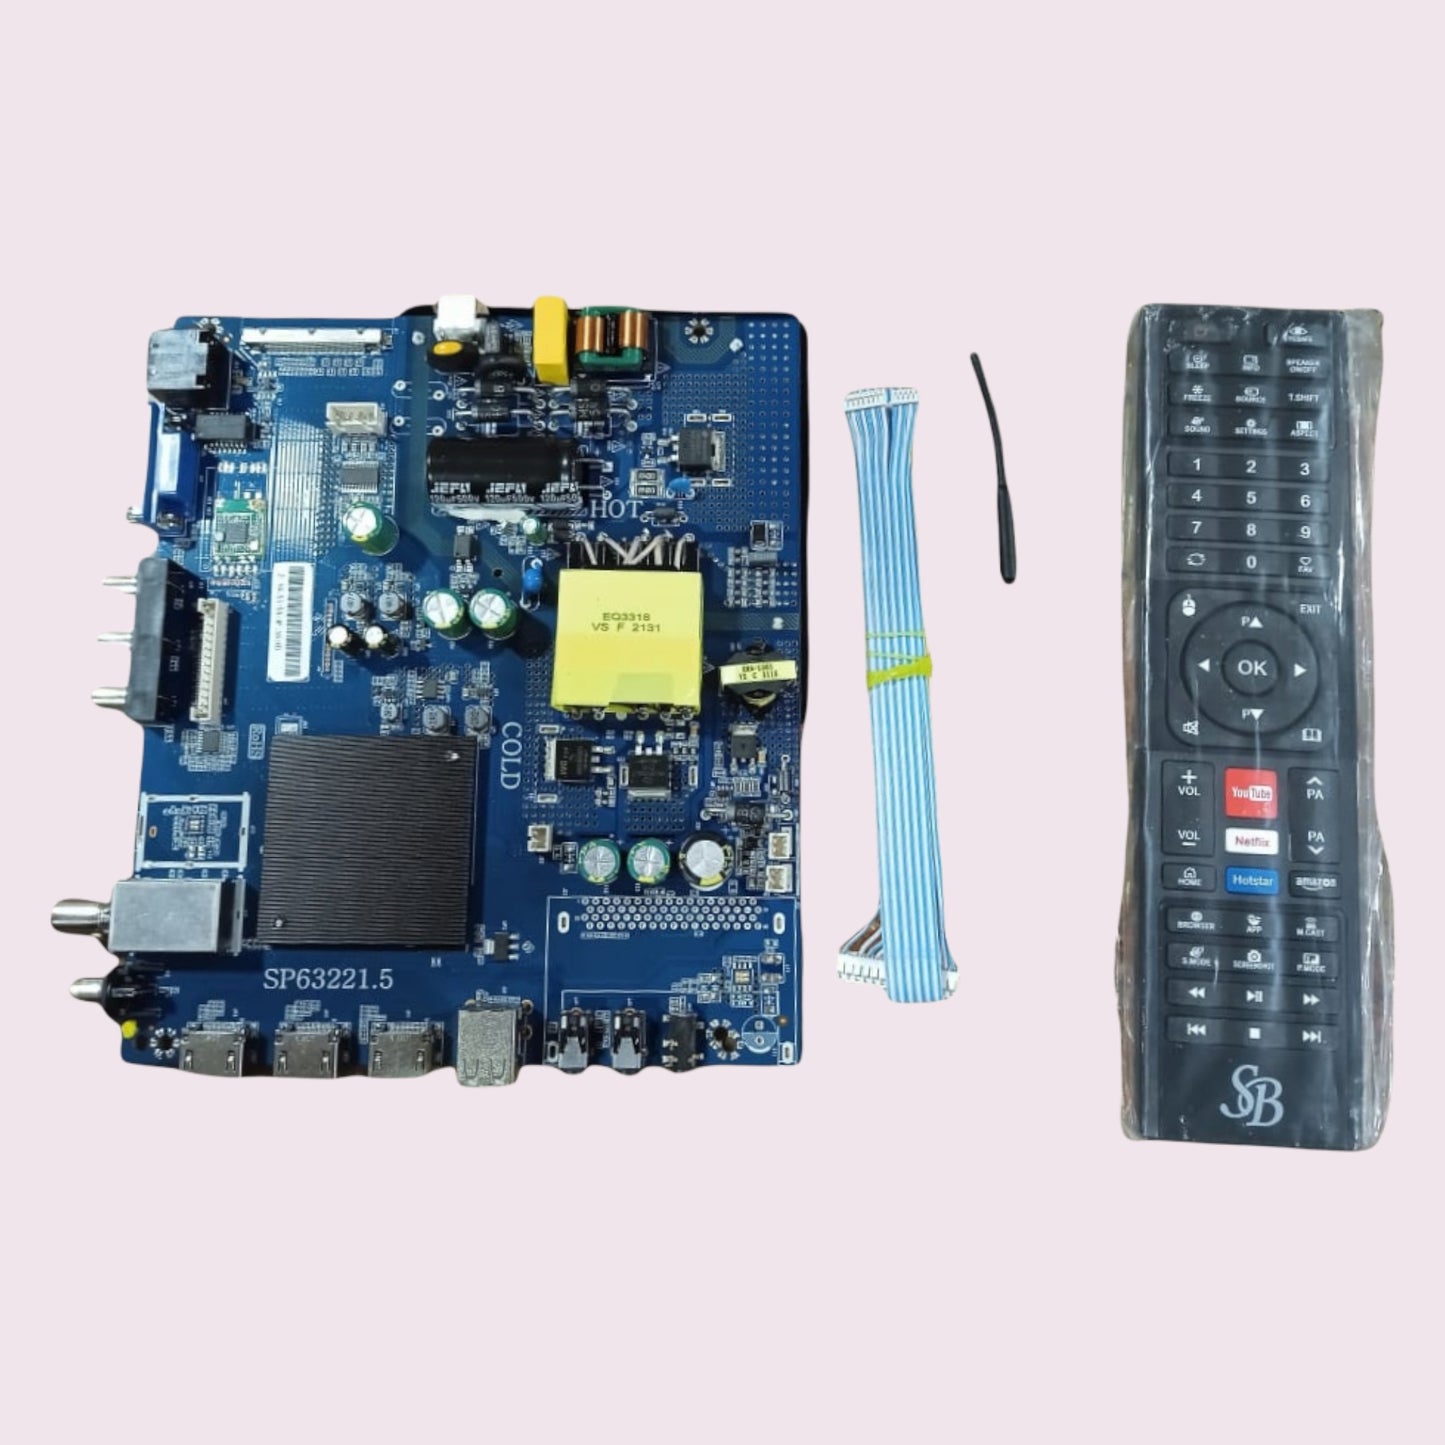 Android TV Board  4K  43 inch to 50Inch Smart TV with Remote SP63221.5 - Faritha